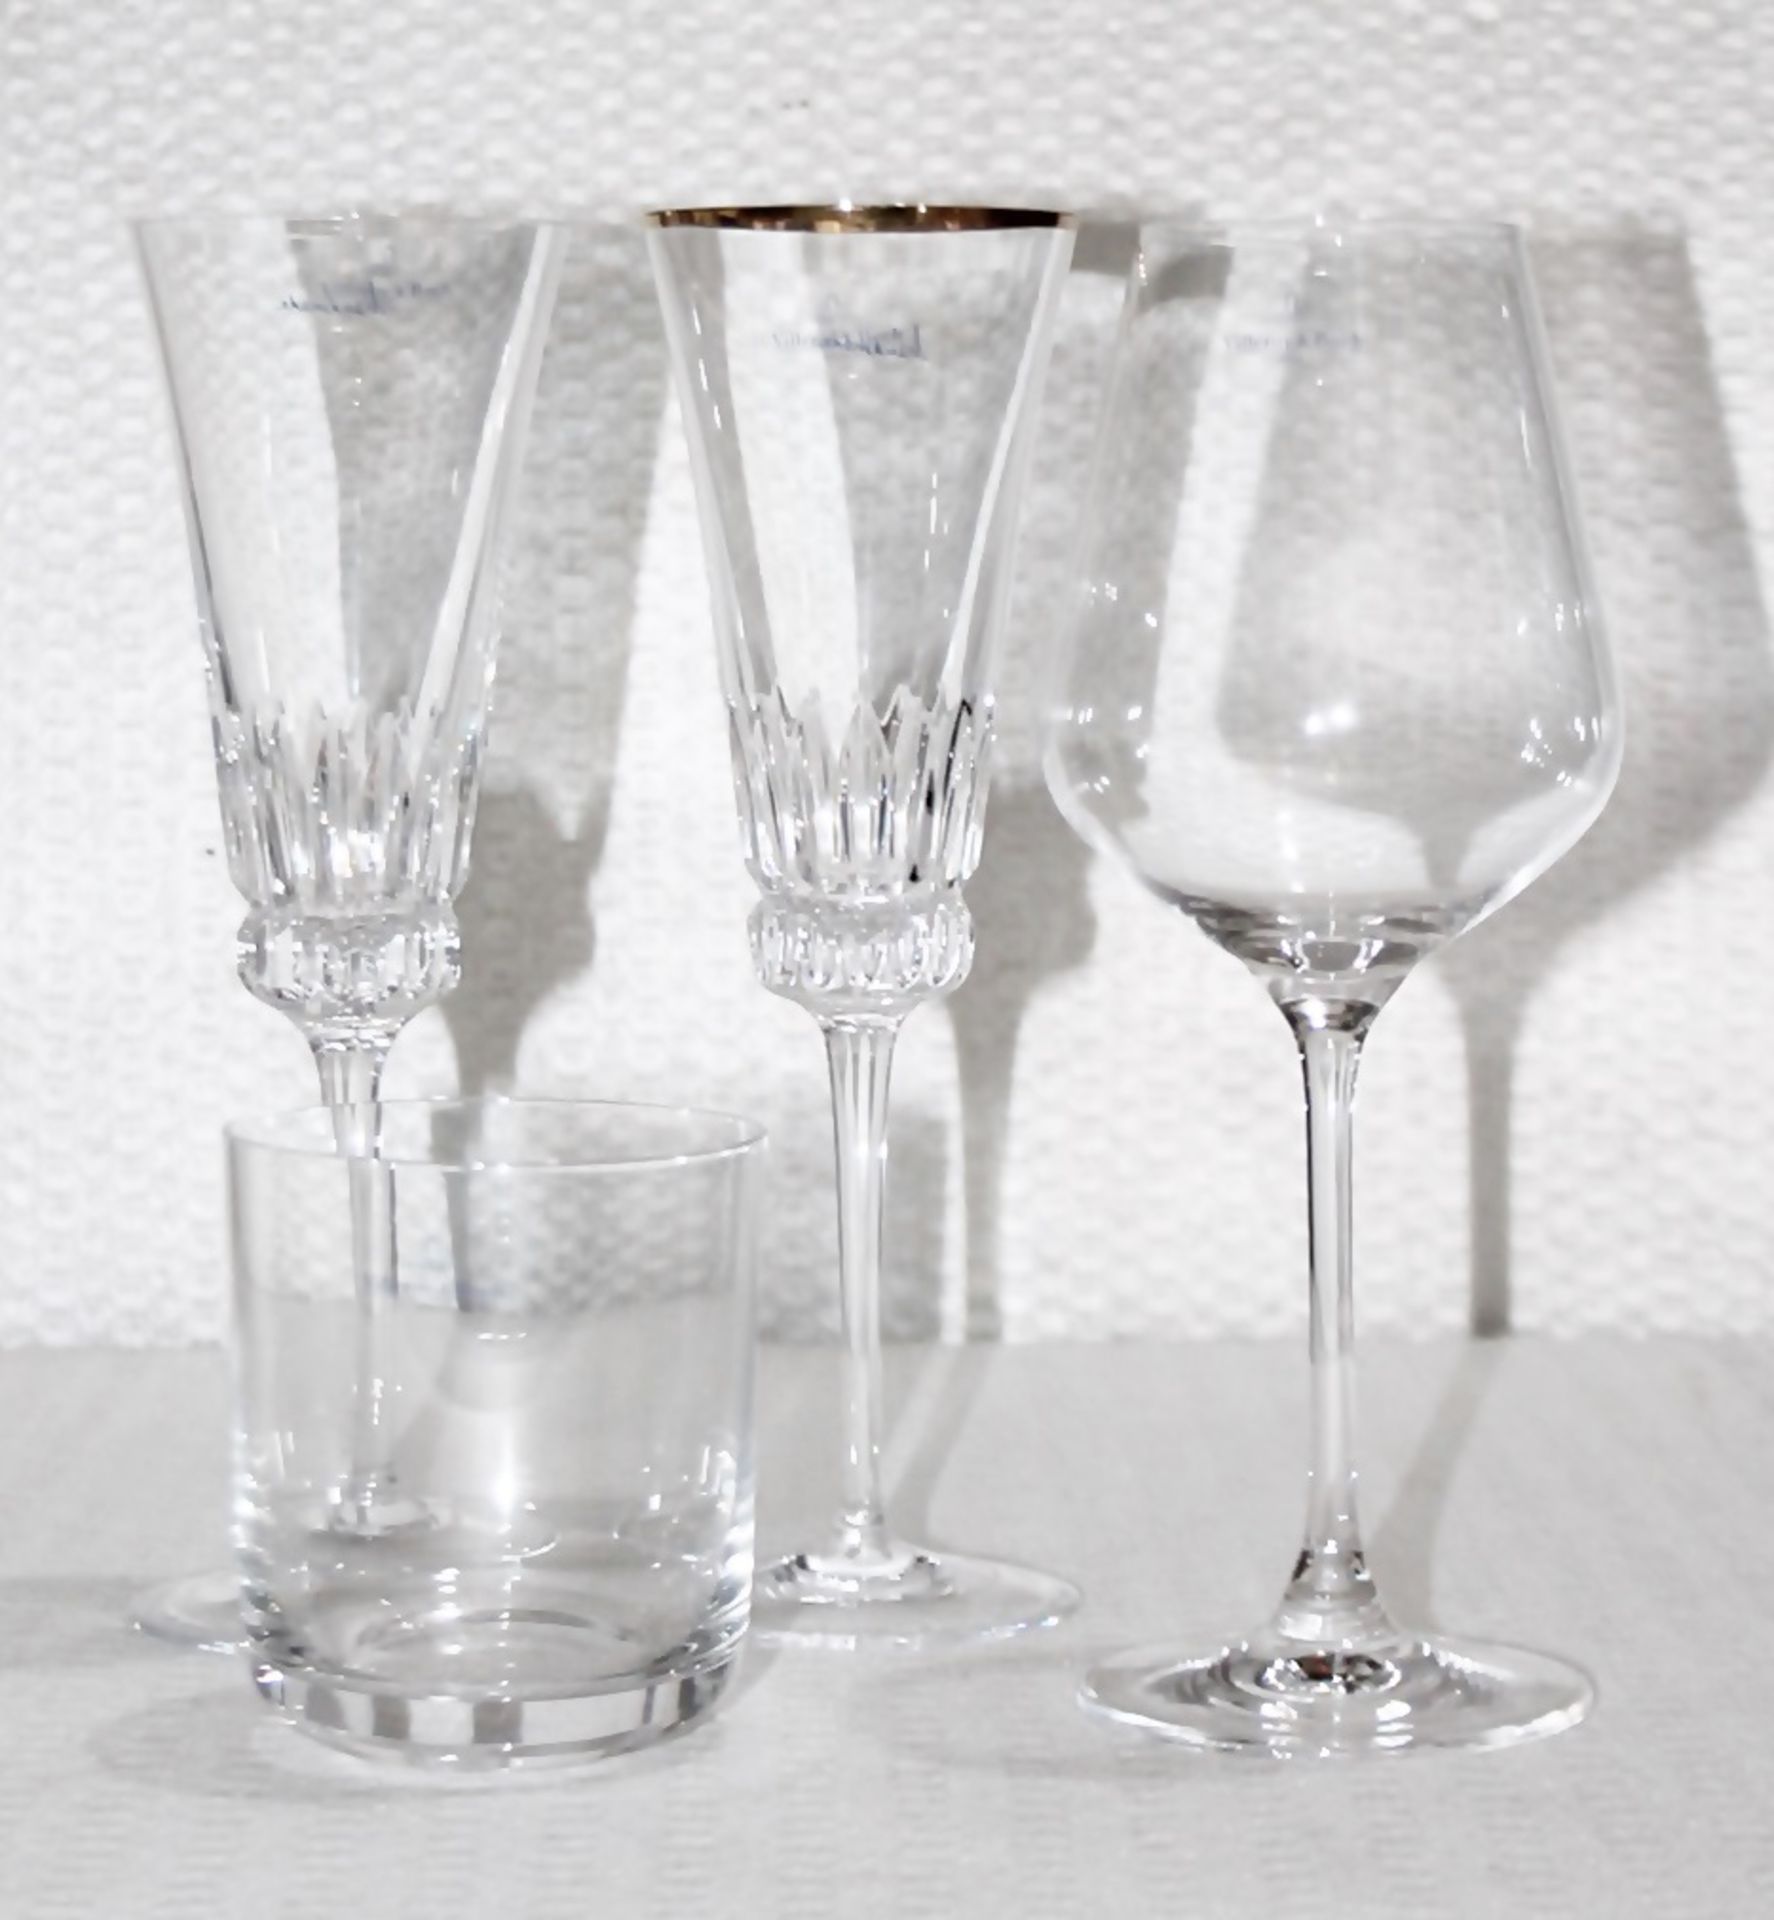 4 x Assorted VILLEROY & BOCH Glasses Inc. 2 x Mouth-blown Grand Royal Champagne Flutes - Image 4 of 10